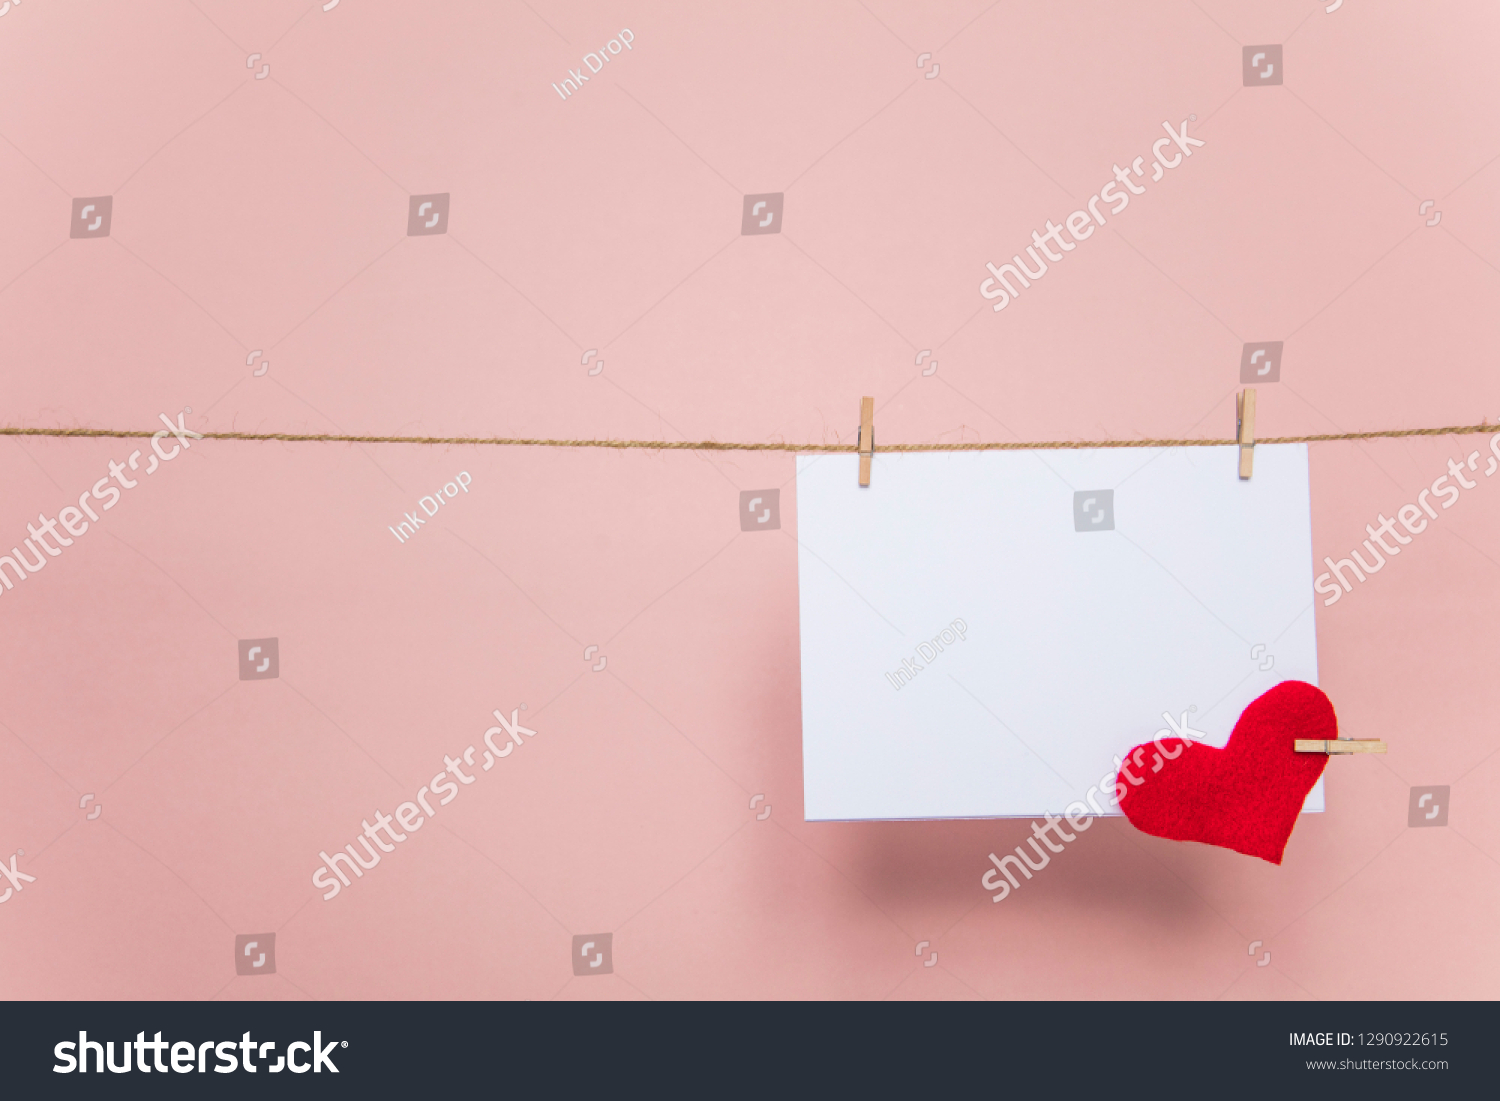 Blank Love Letter Pegged Line Red Stock Photo 1290922615 | Shutterstock